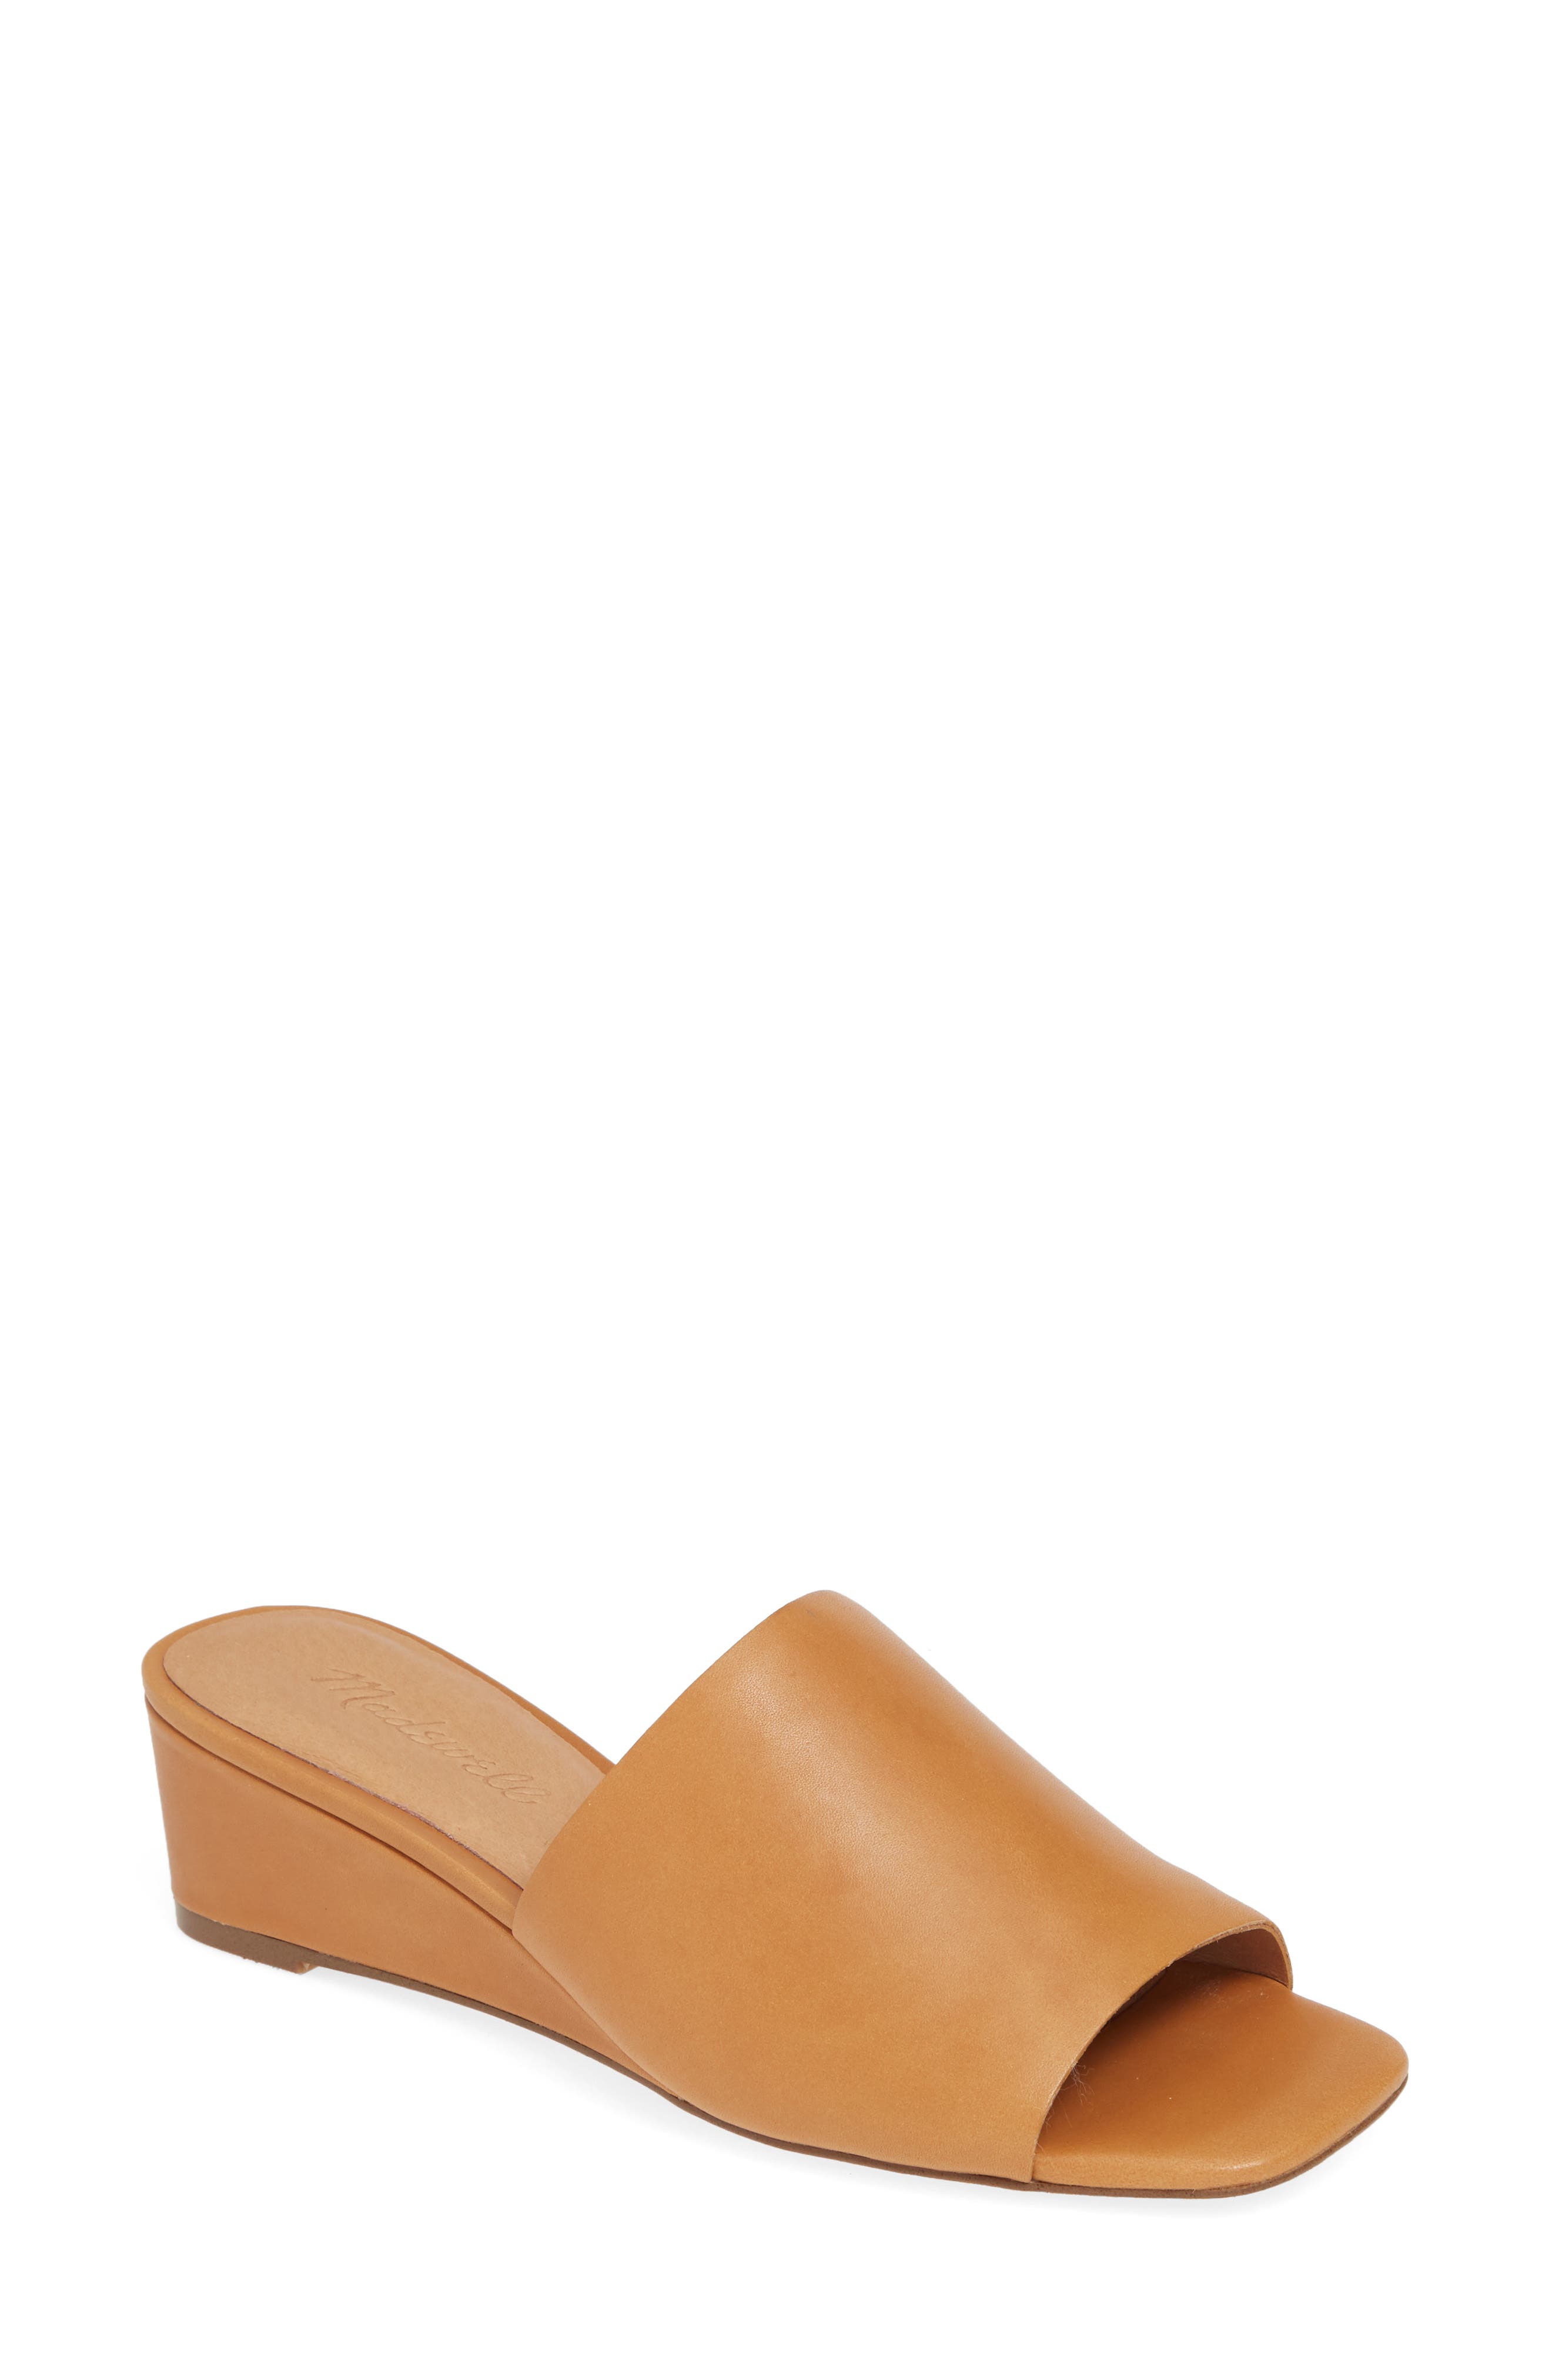 The Stacey Wedge Slide Sandal 